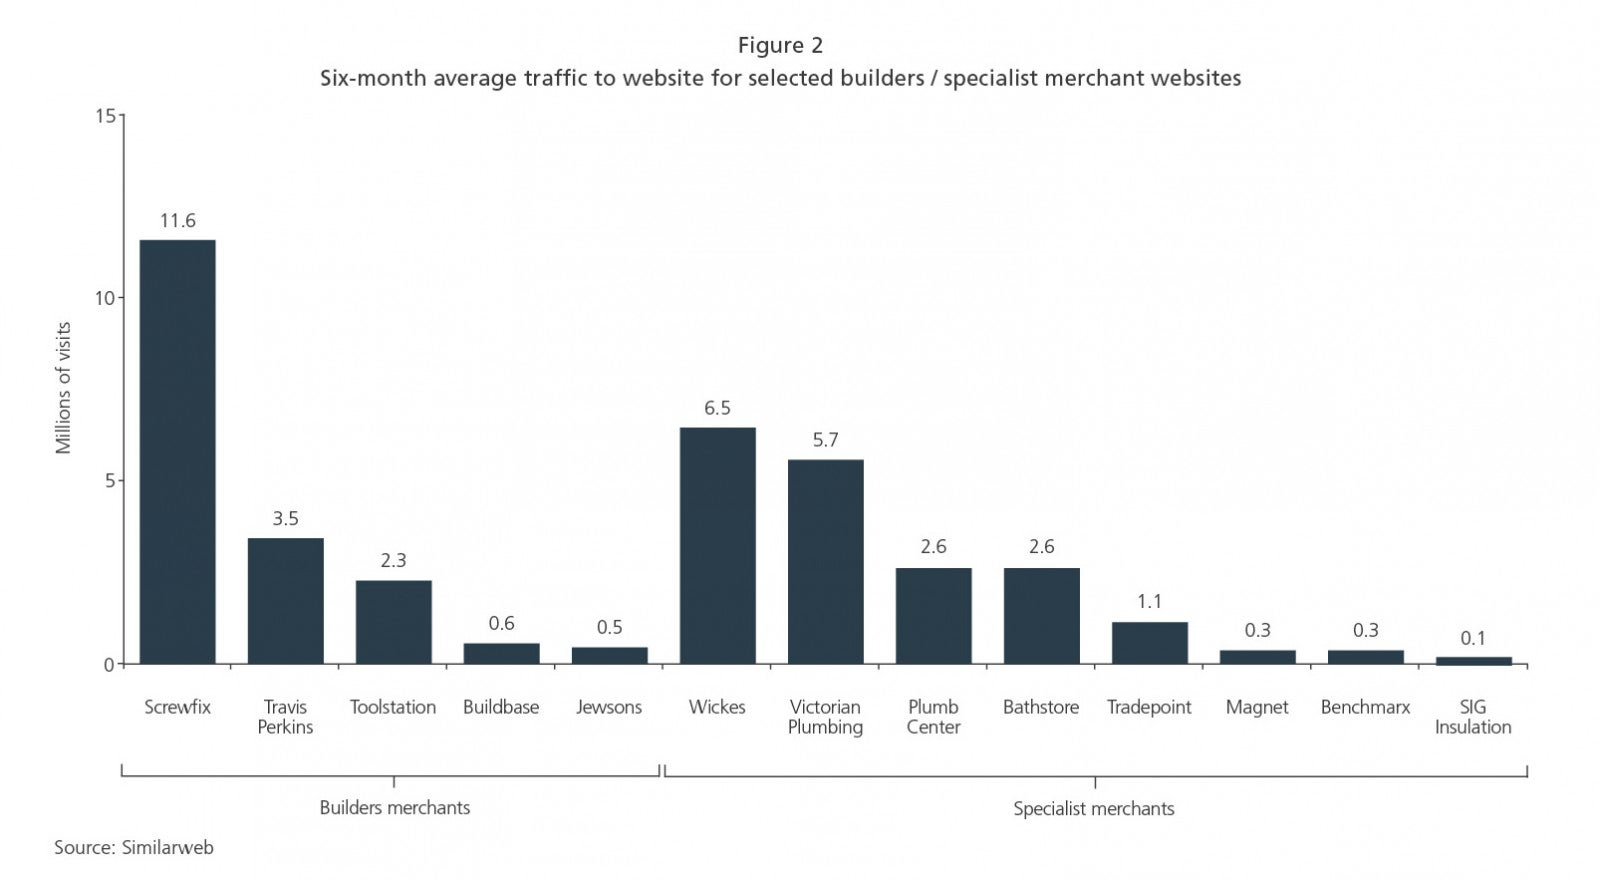 Six month average traffic to website for selected builders / specialist merchant websites